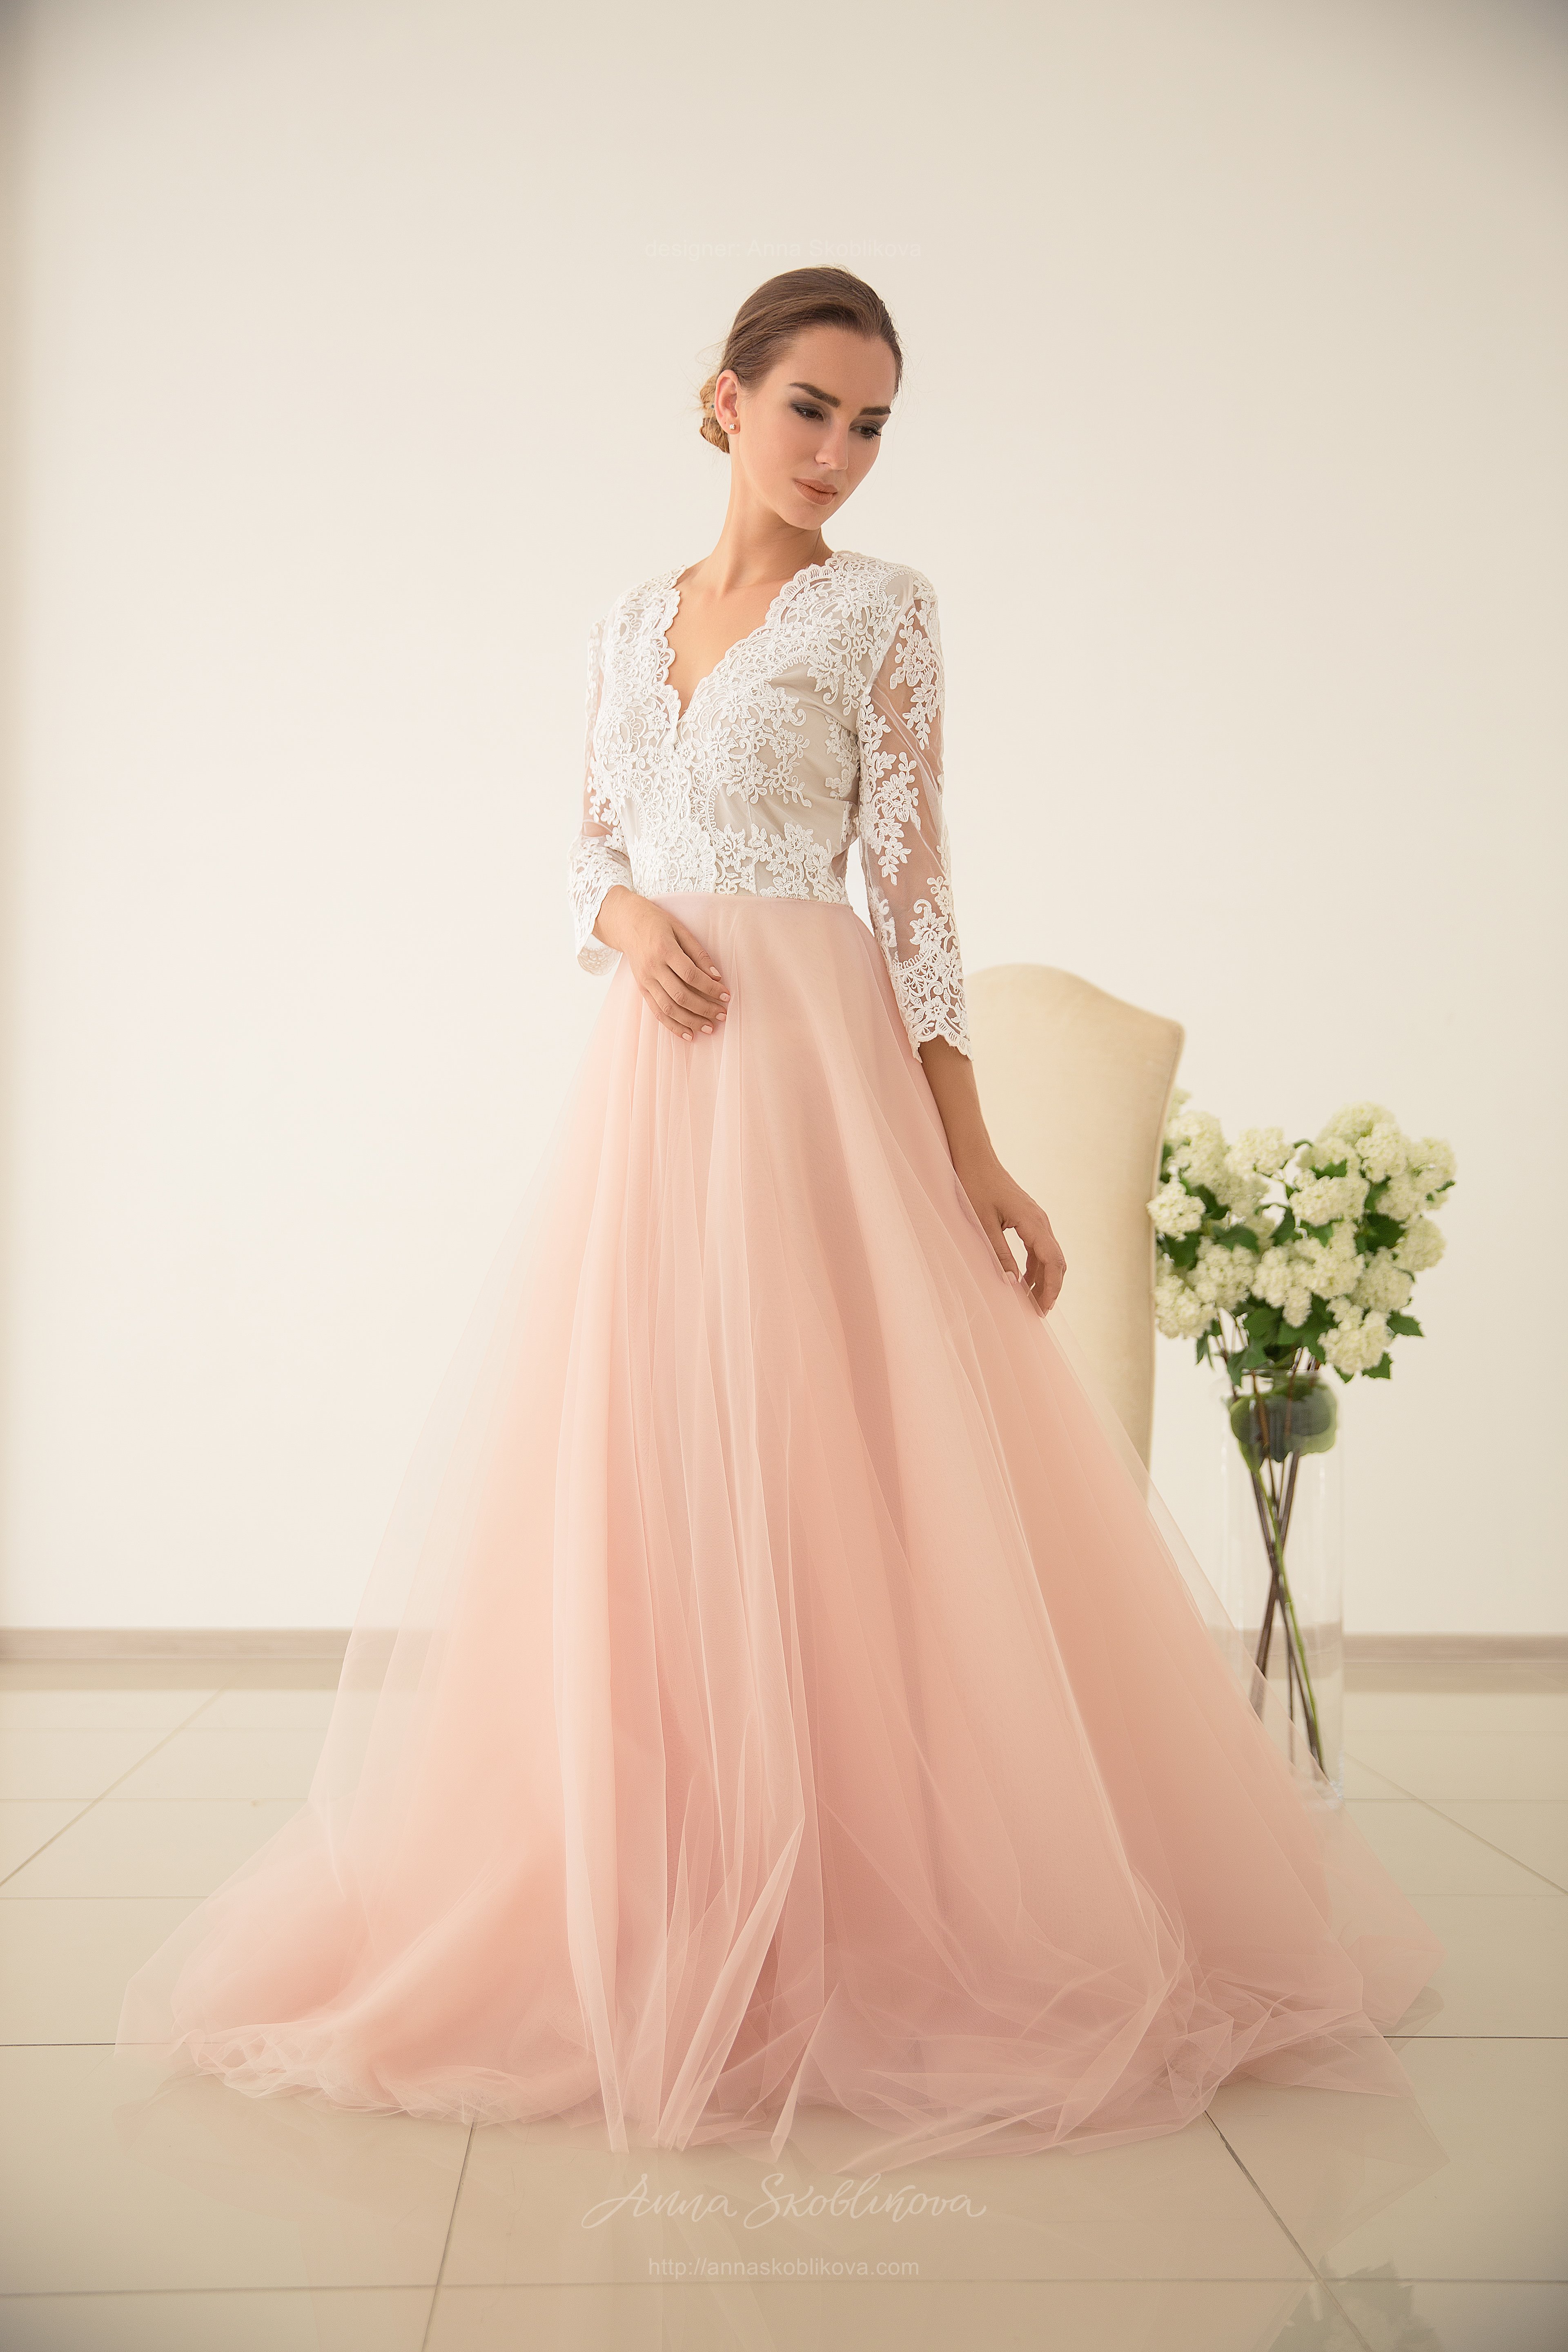 Pink Wedding Dress With Powder Shade Wedding Dresses And Evening Gowns By Anna Skoblikova 8151